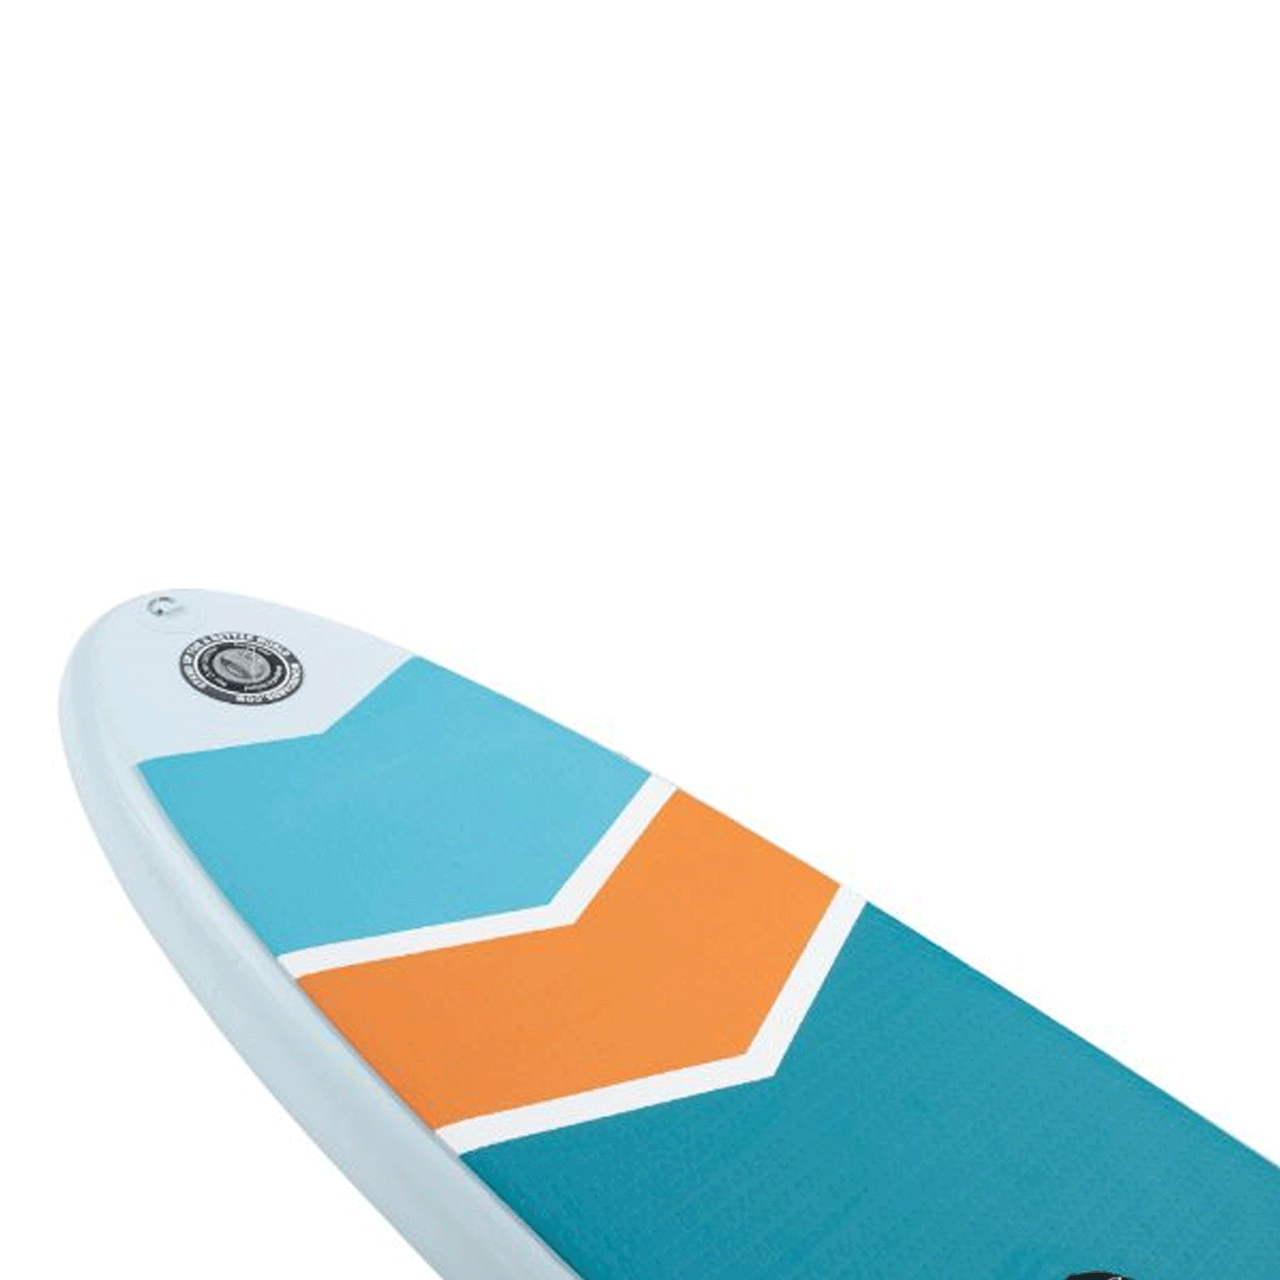 MOAI All-Round Inflatable SUP Package 9'5" (287 cm)